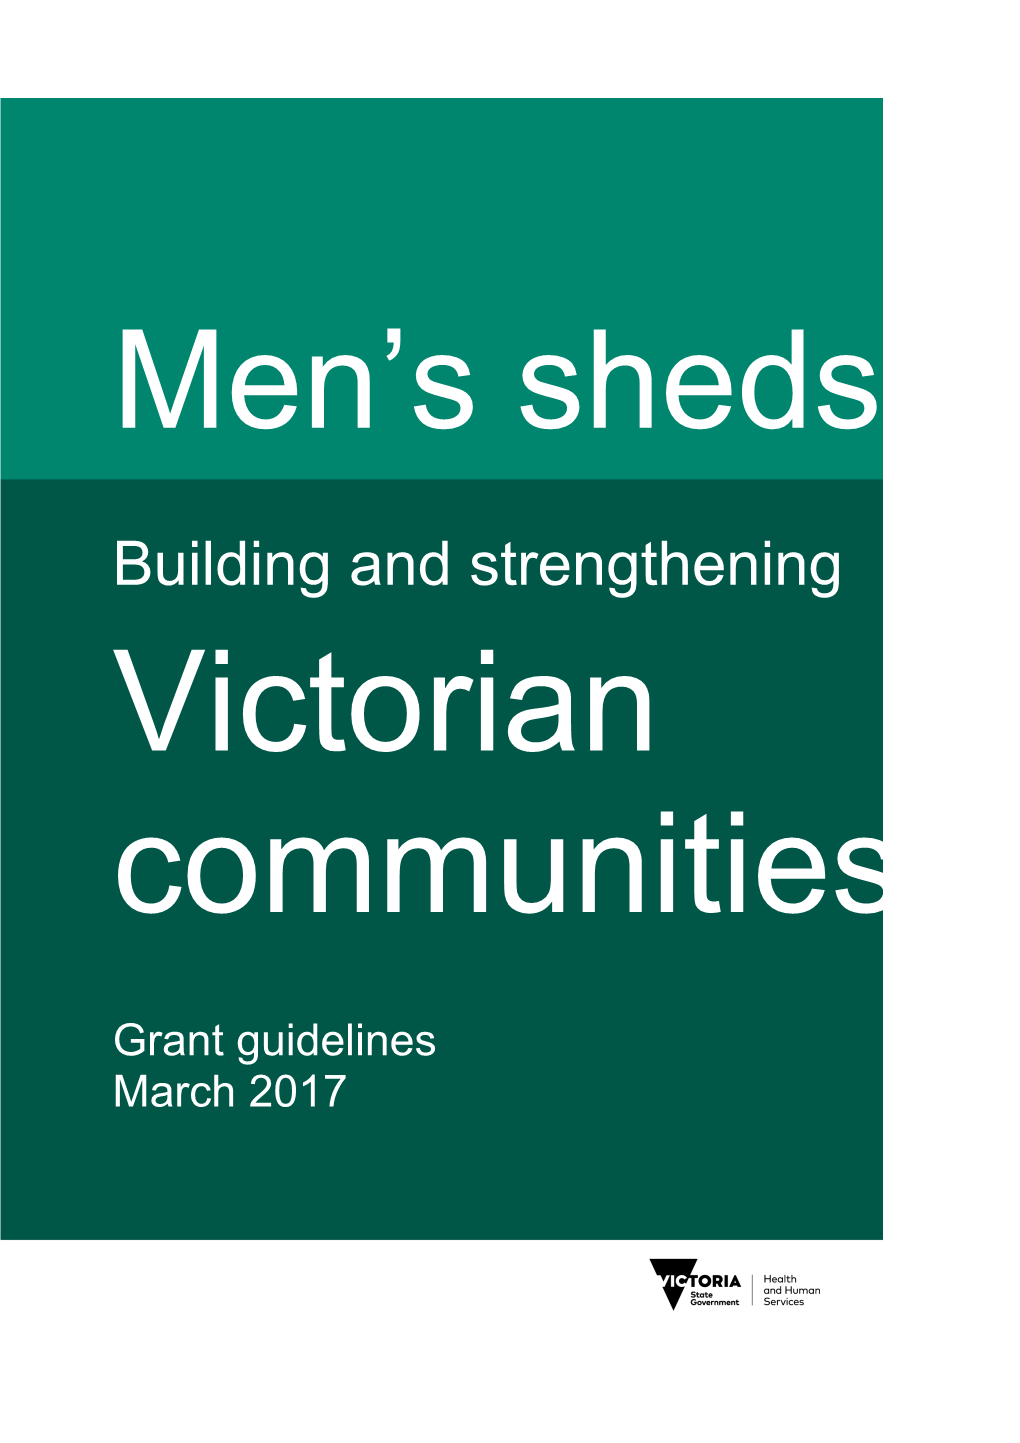 Guidelines for Applying for Grants to Build Or Refurbish Men's Sheds